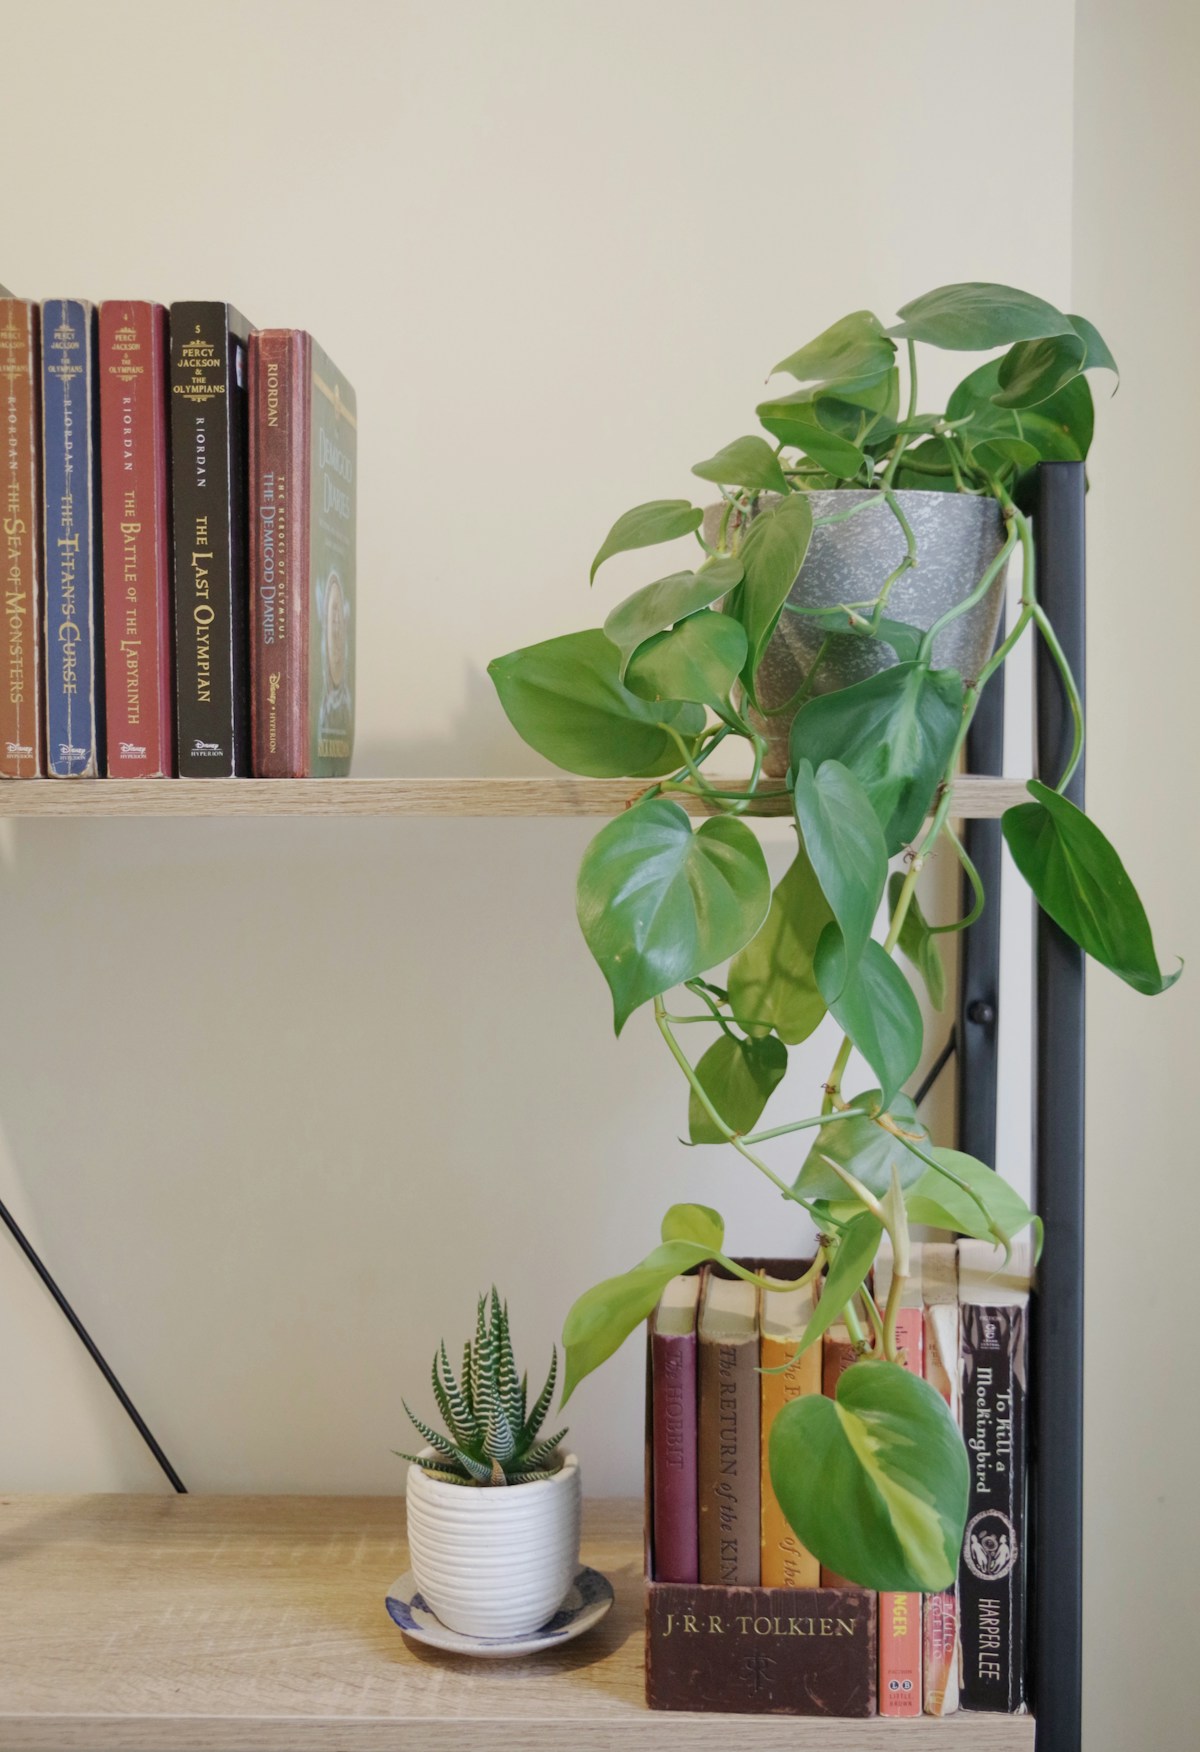 Workplace Wellness,Biophilia,COVID-19,Light,Mindfulness, plants in office, office plants